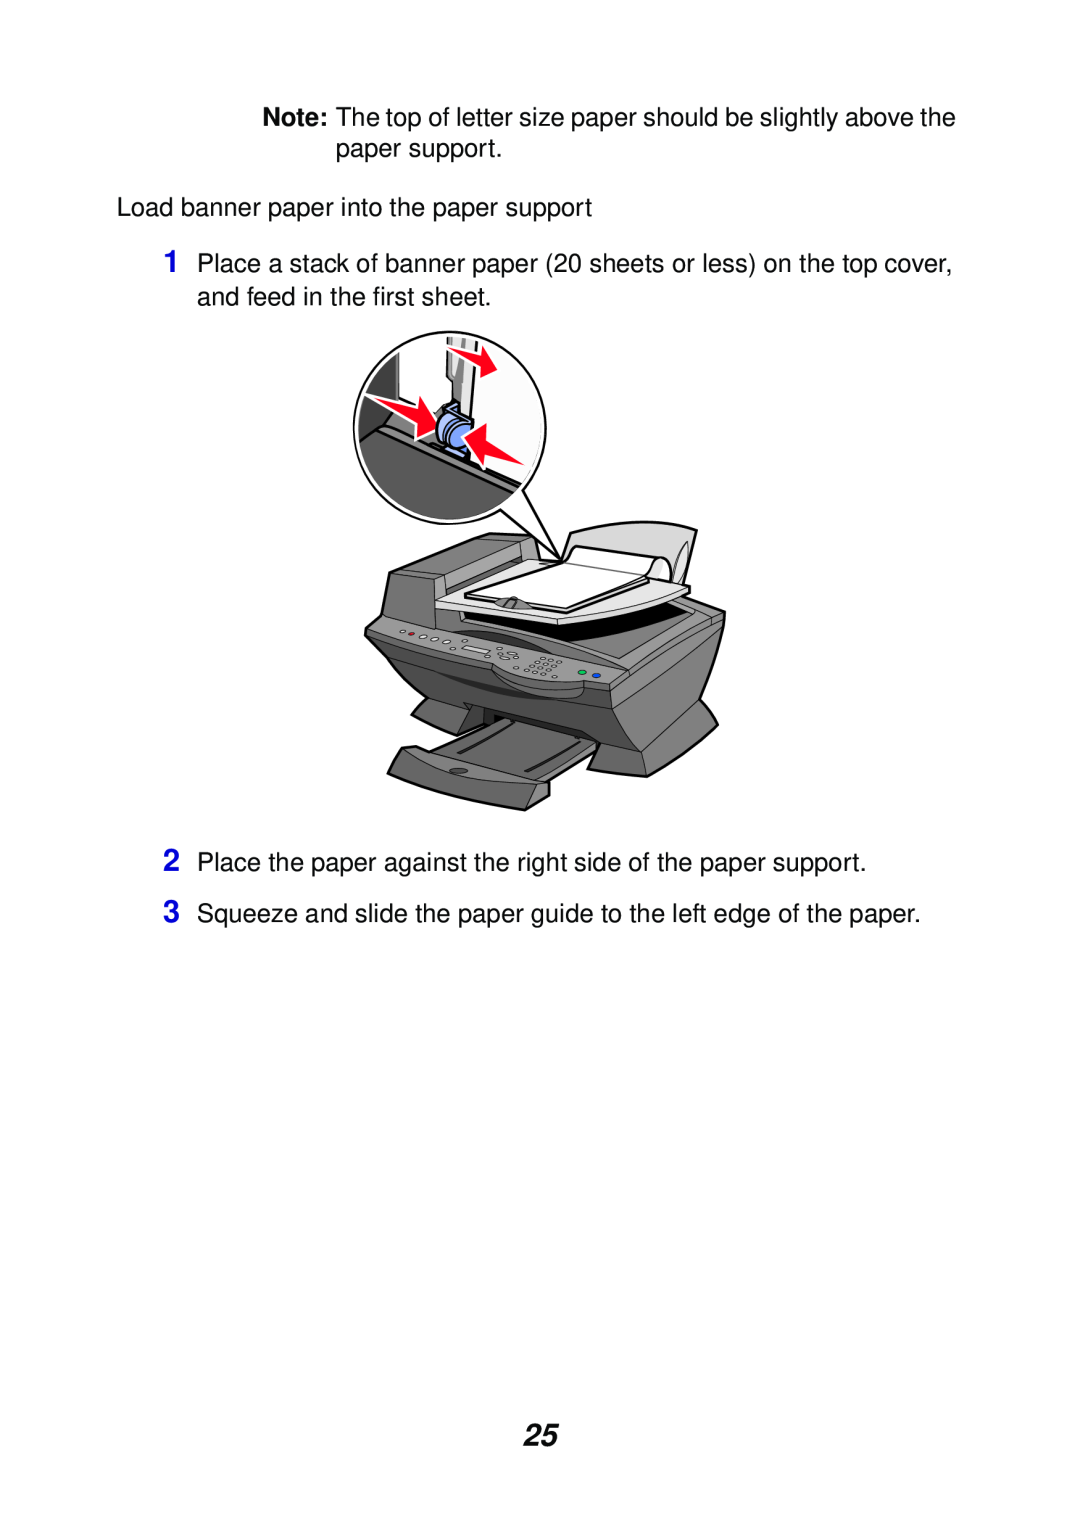 Lexmark X6100 manual Load banner paper into the paper support 